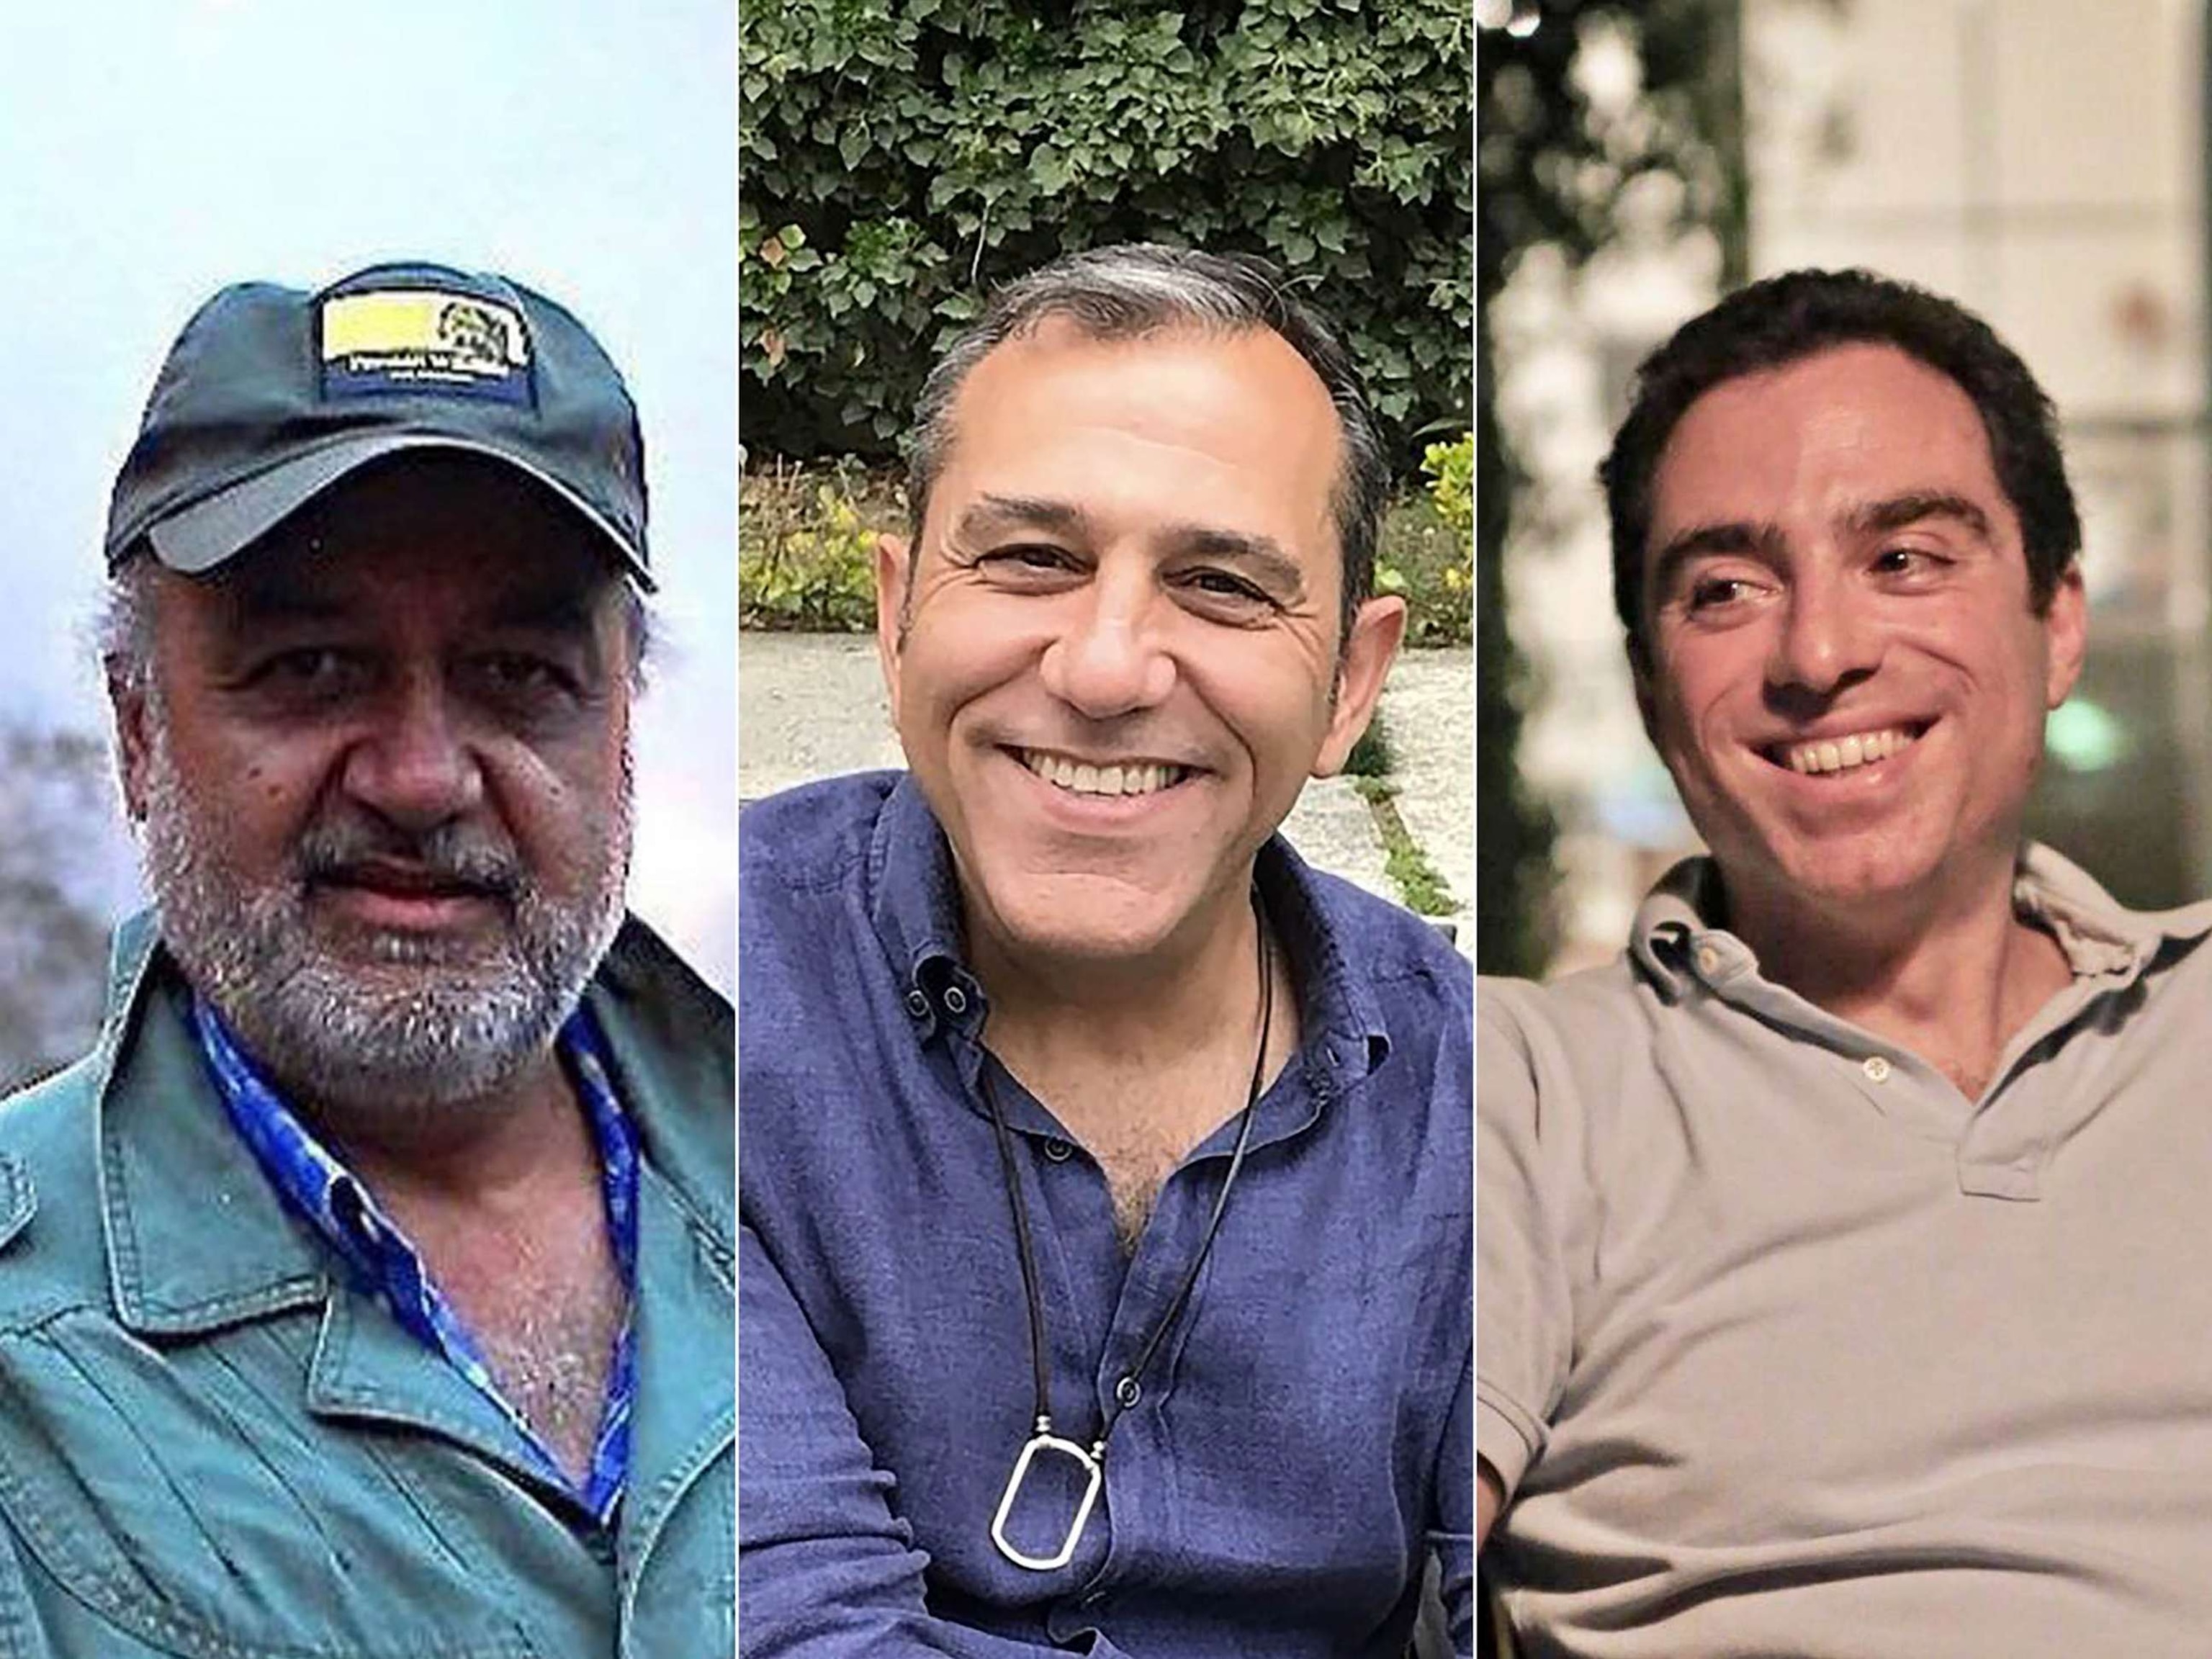 PHOTO: From left to right split shows photos of Emad Shargi, Morad Tahbaz and Siamak Namazi